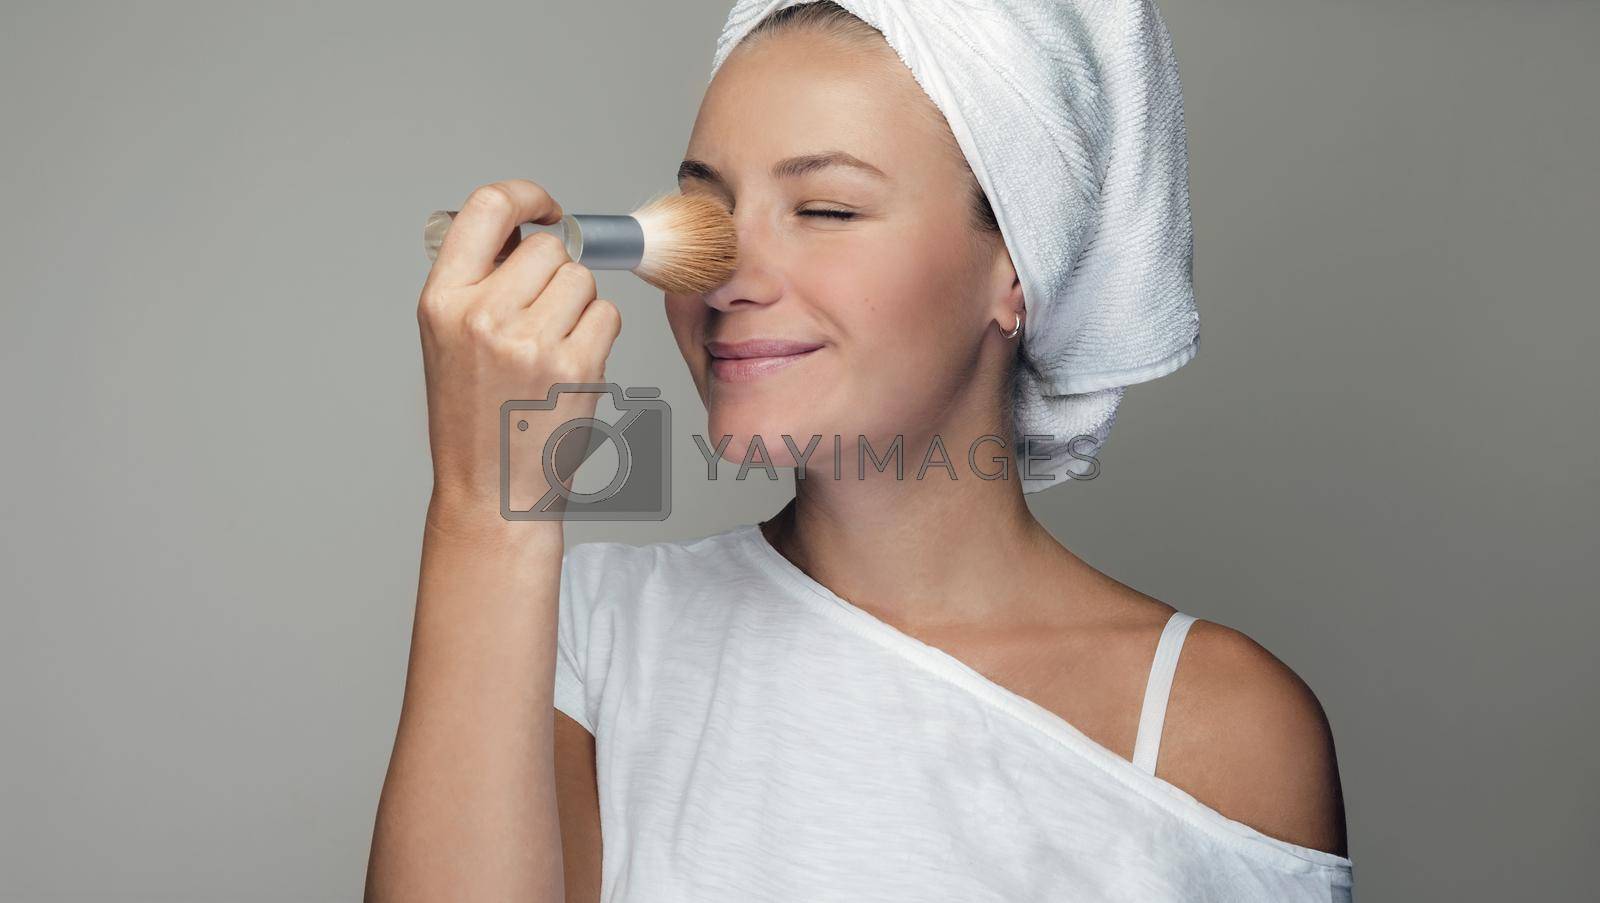 Royalty free image of Pretty Woman Applying Makeup by Anna_Omelchenko